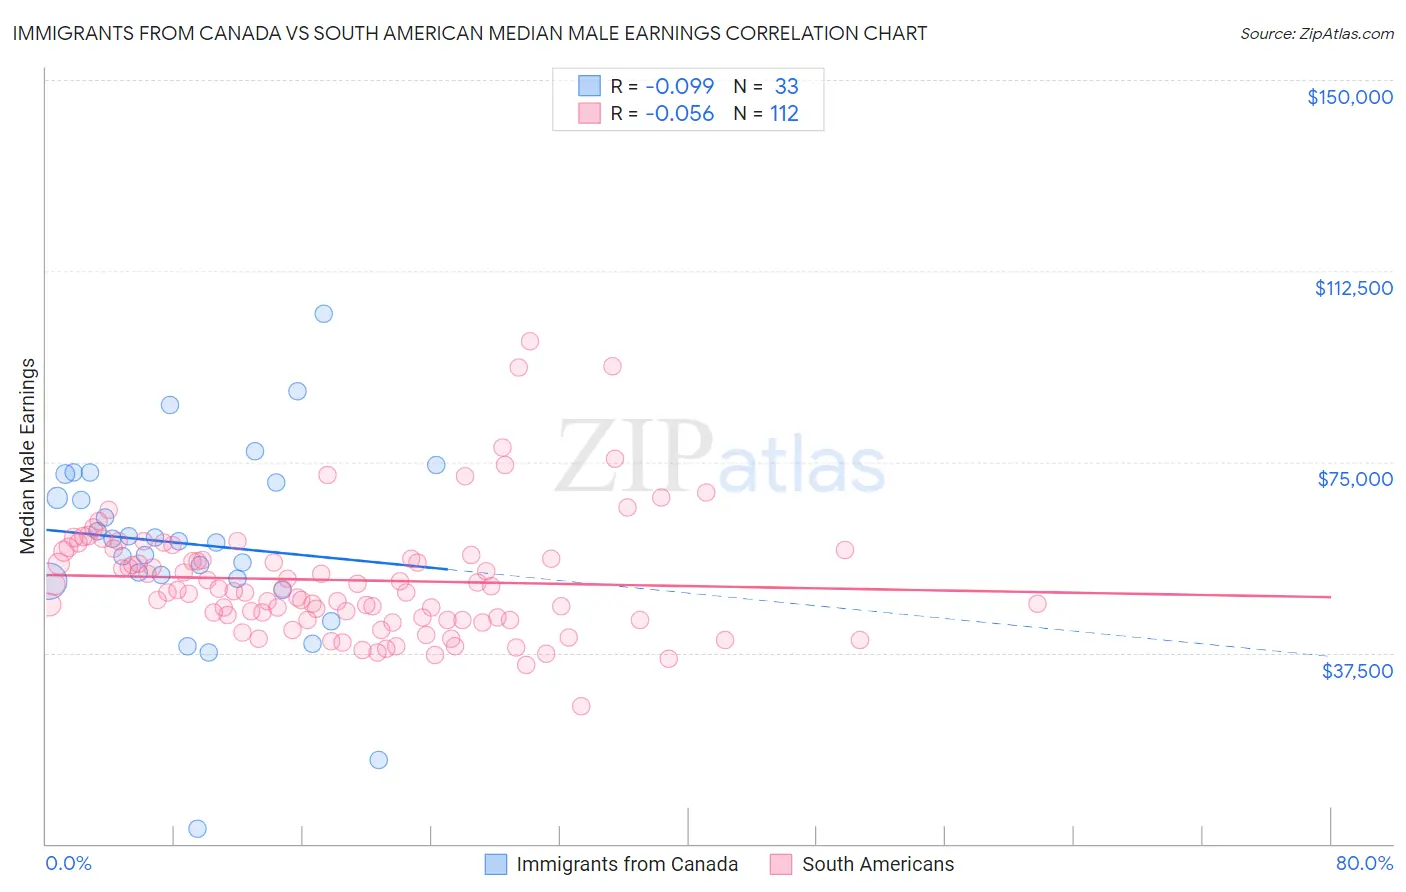 Immigrants from Canada vs South American Median Male Earnings